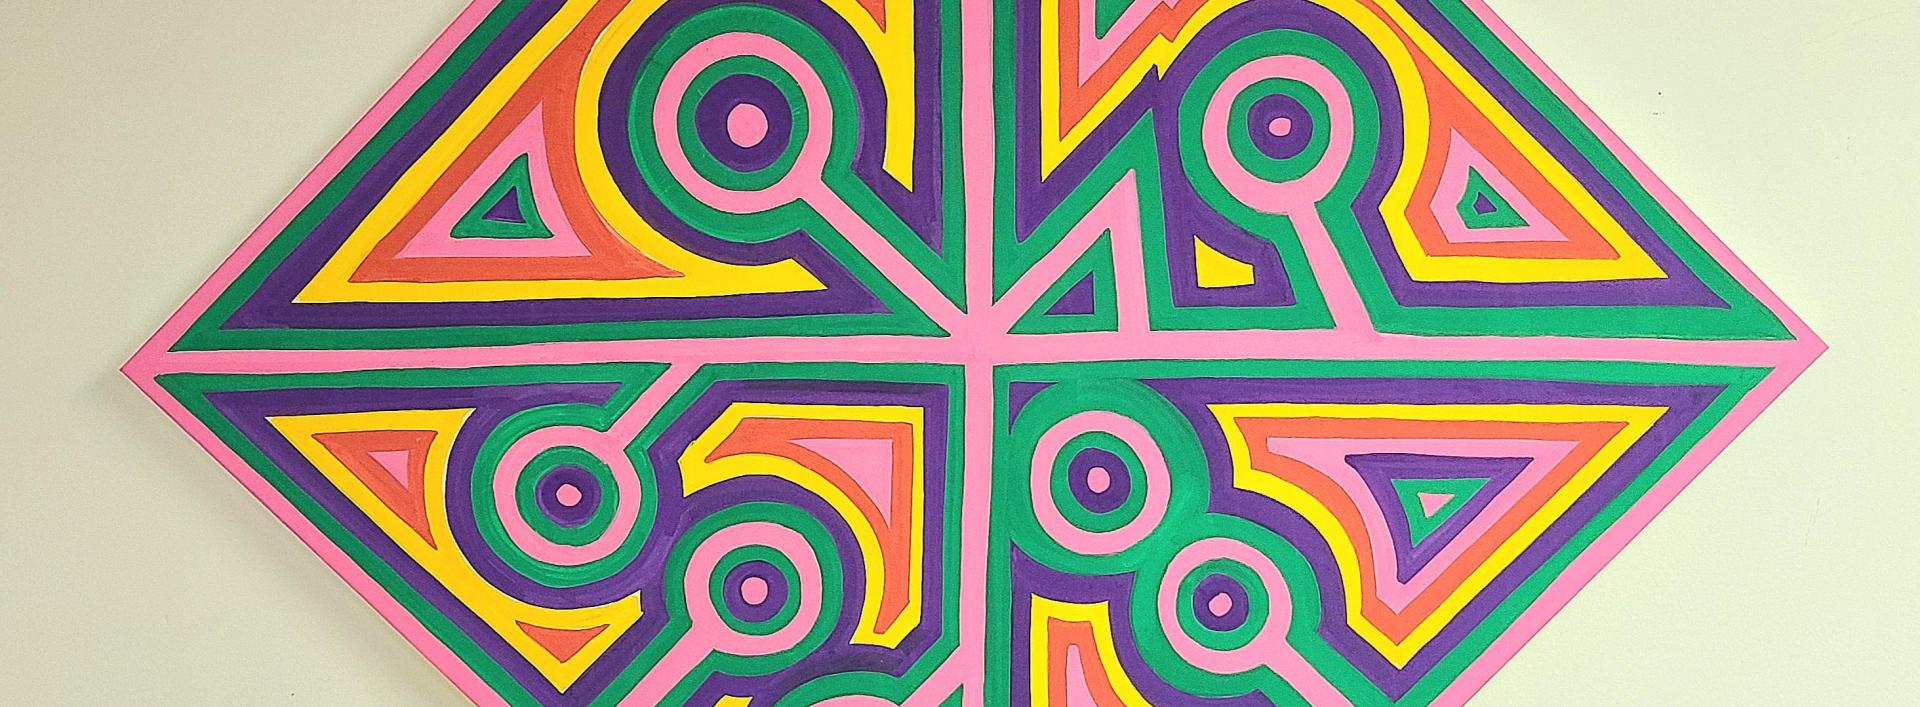 "Initials" by CFW Aguirre. It is a diamond-shaped canvas divided into symmetrical sections, each filled with vibrant and contrasting colors such as pink, yellow, green, and purple. The design features a combination of geometric patterns, including triangles and circles, with circular patterns at the tips of the diamond.